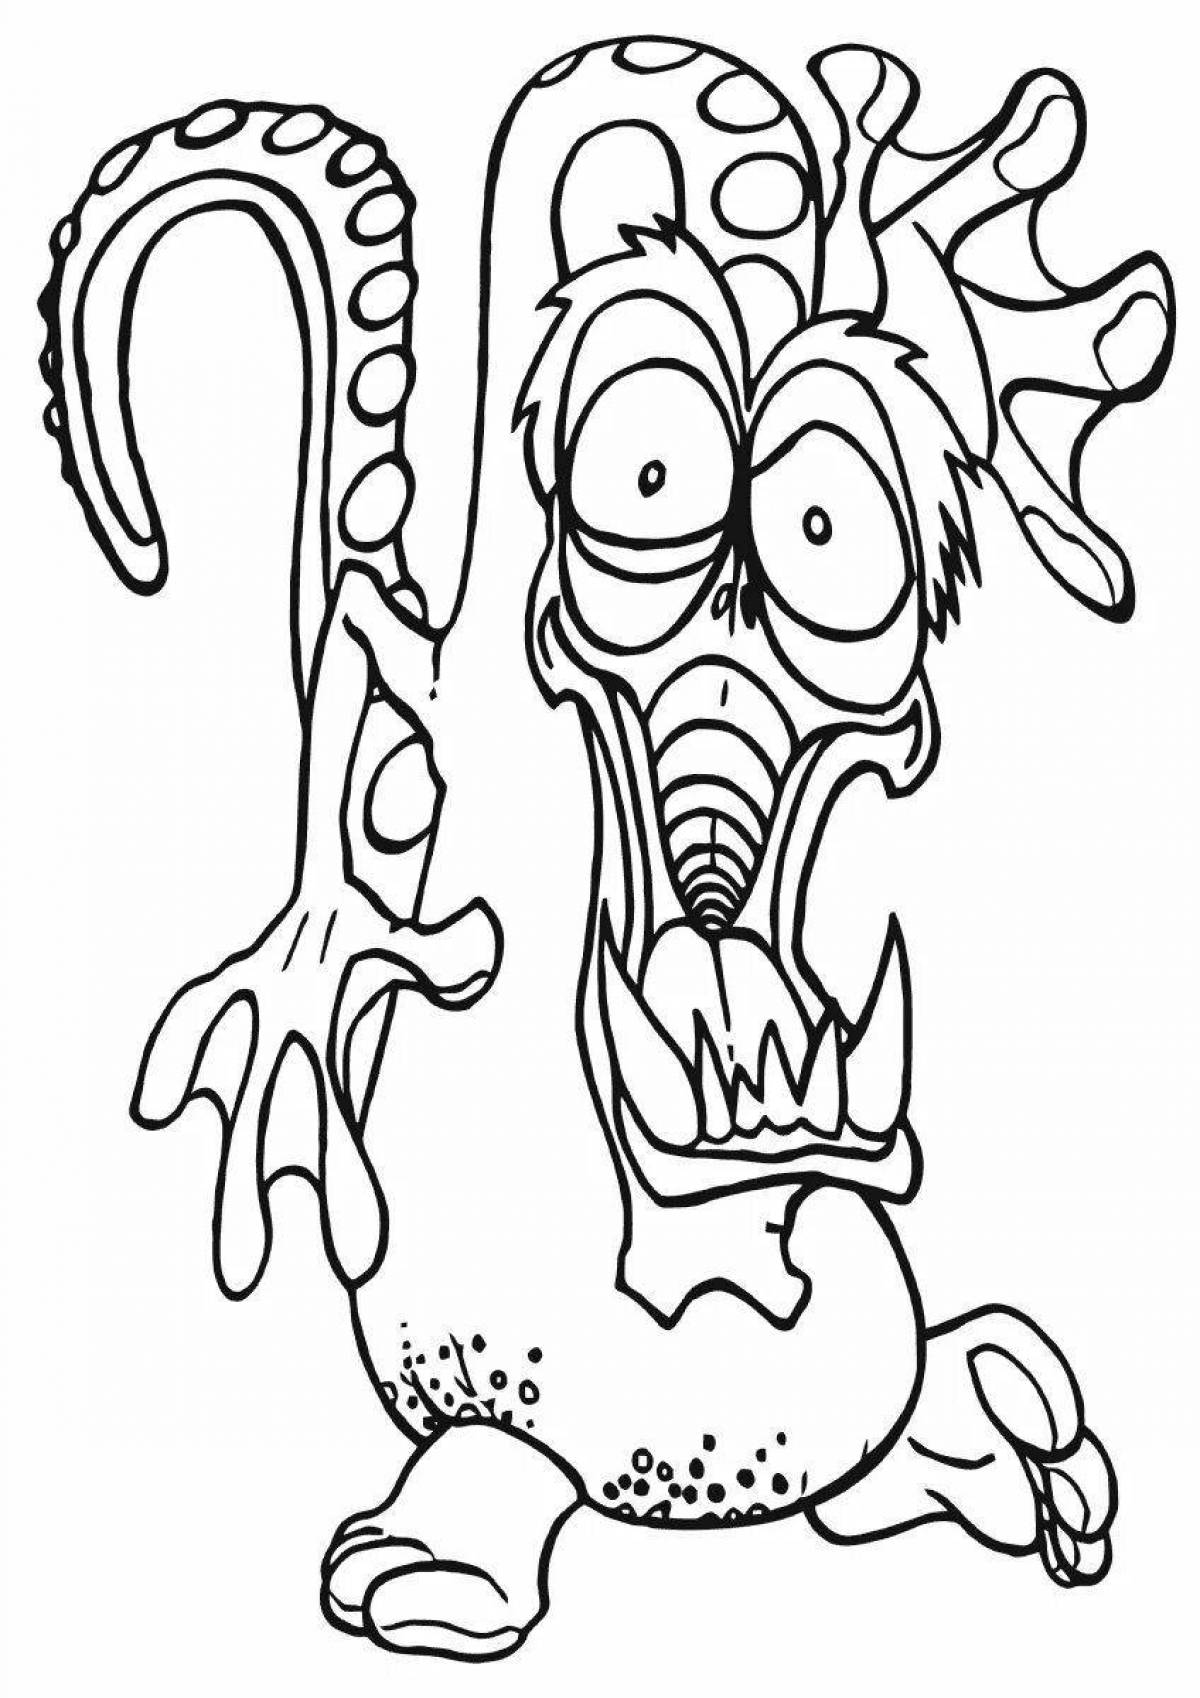 Terrifying scary monsters coloring book